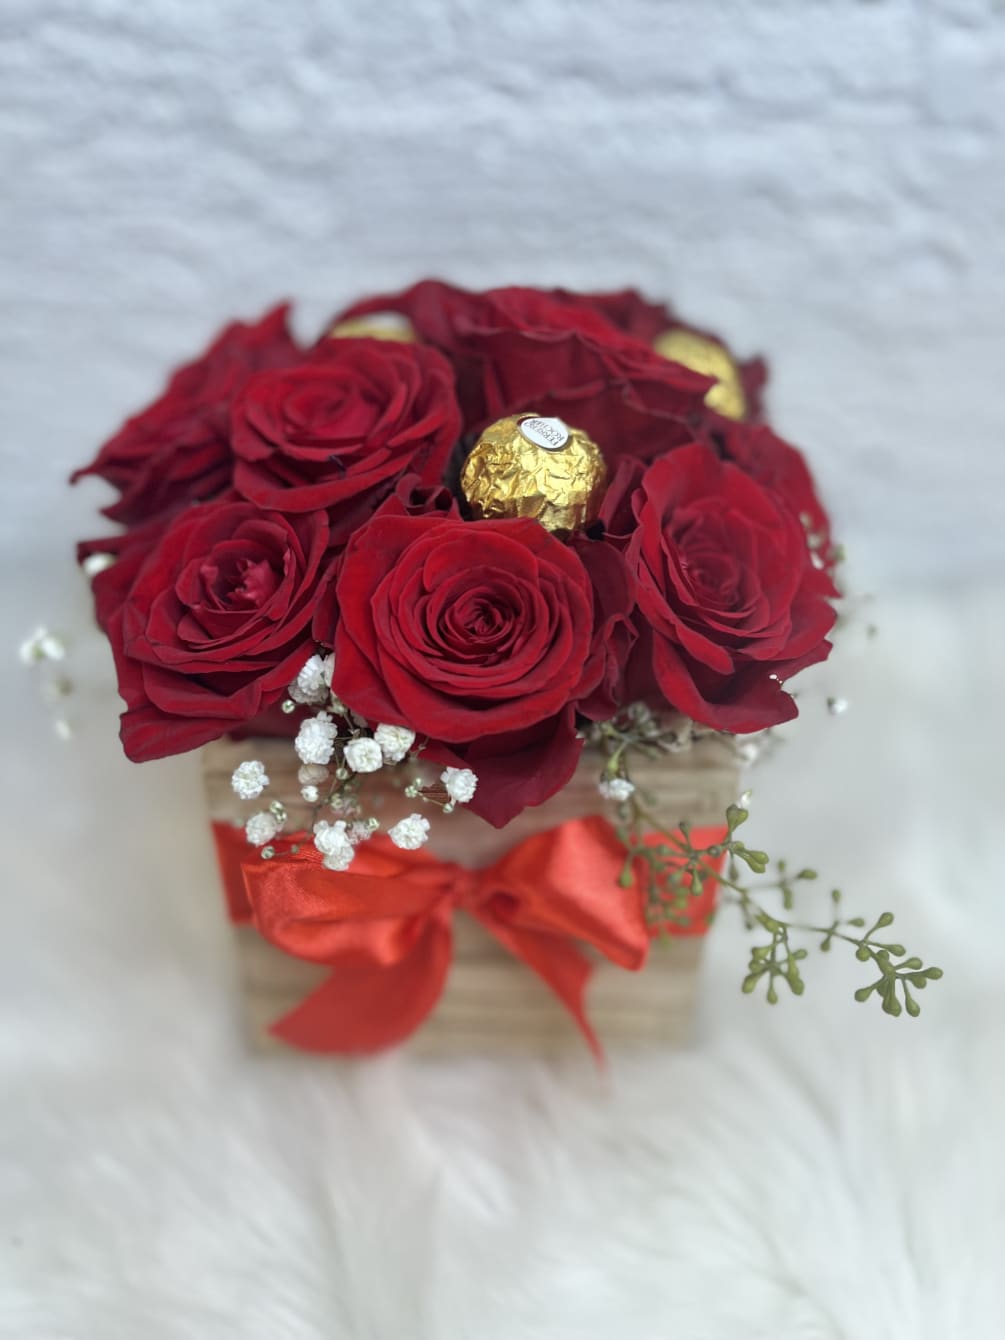 12 fresh red roses and Ferrero chocolates, in a wooden box, to